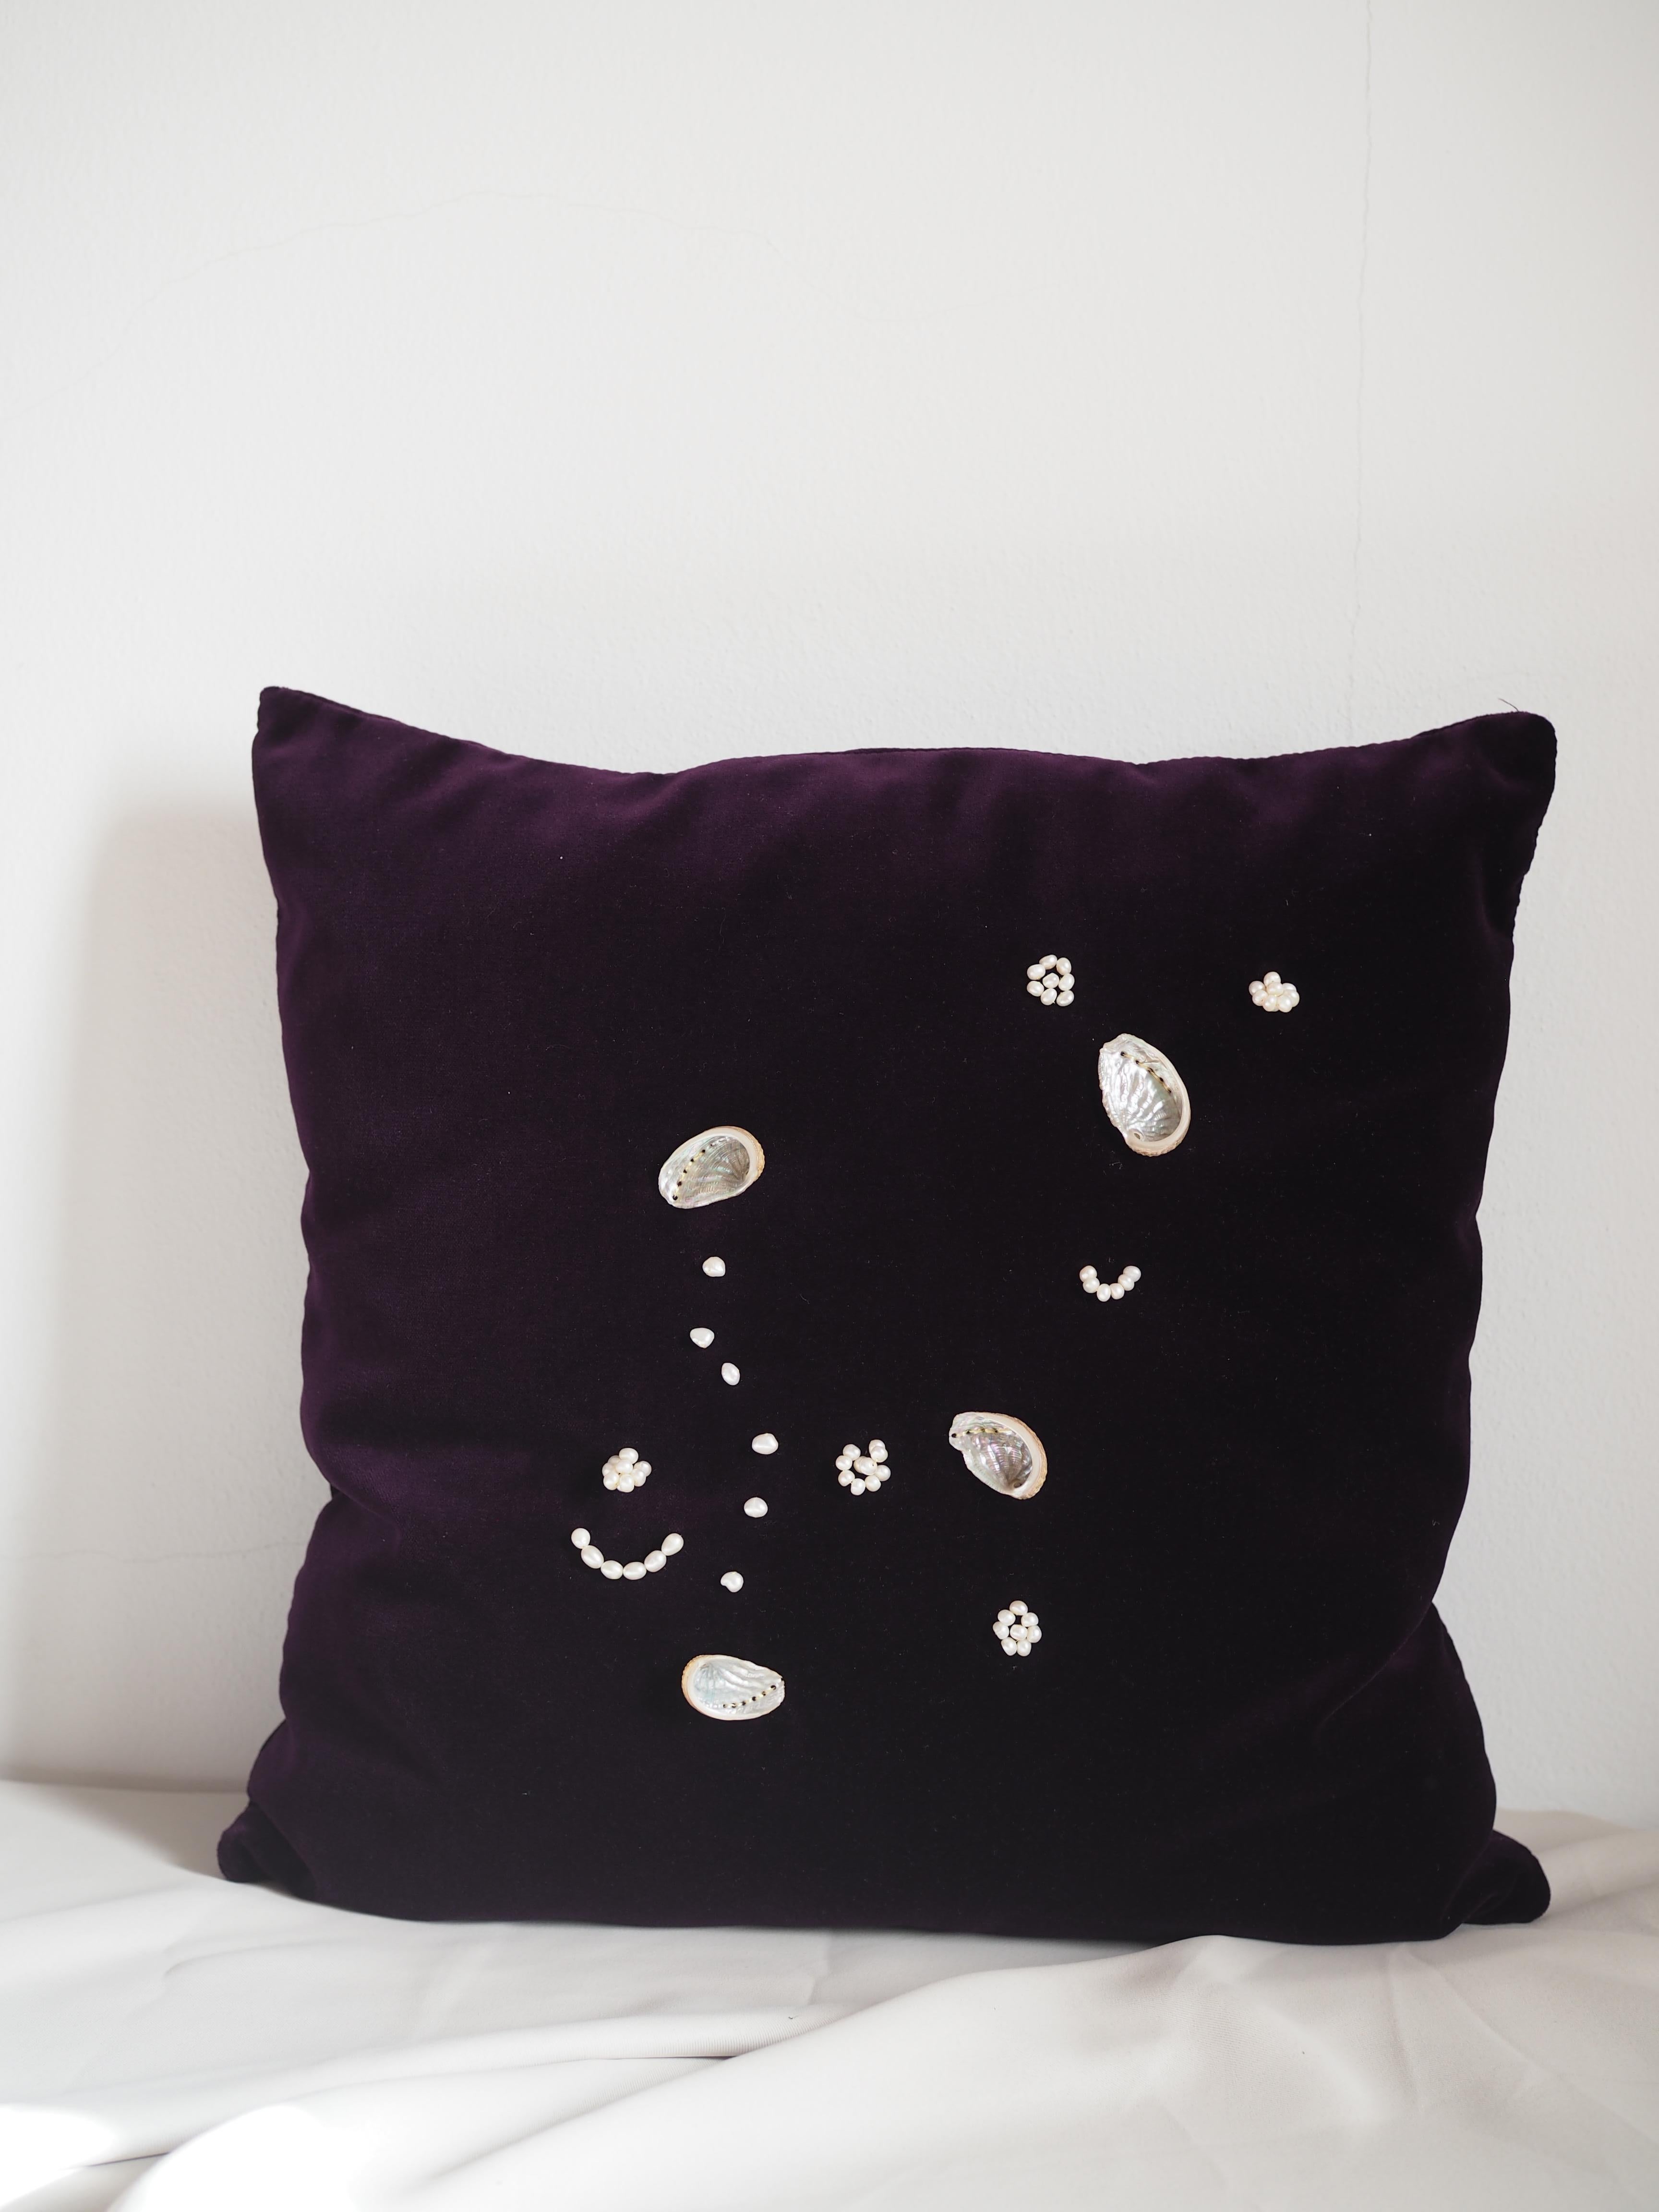 Limited edition embroidered cushion with natural pearls and shells.
Hedonism is the search for pleasure and well-being in any area of our lives, it is the cult of the body, money or carnal pleasure. For me, hedonism is fun, enjoyment, beauty, taking